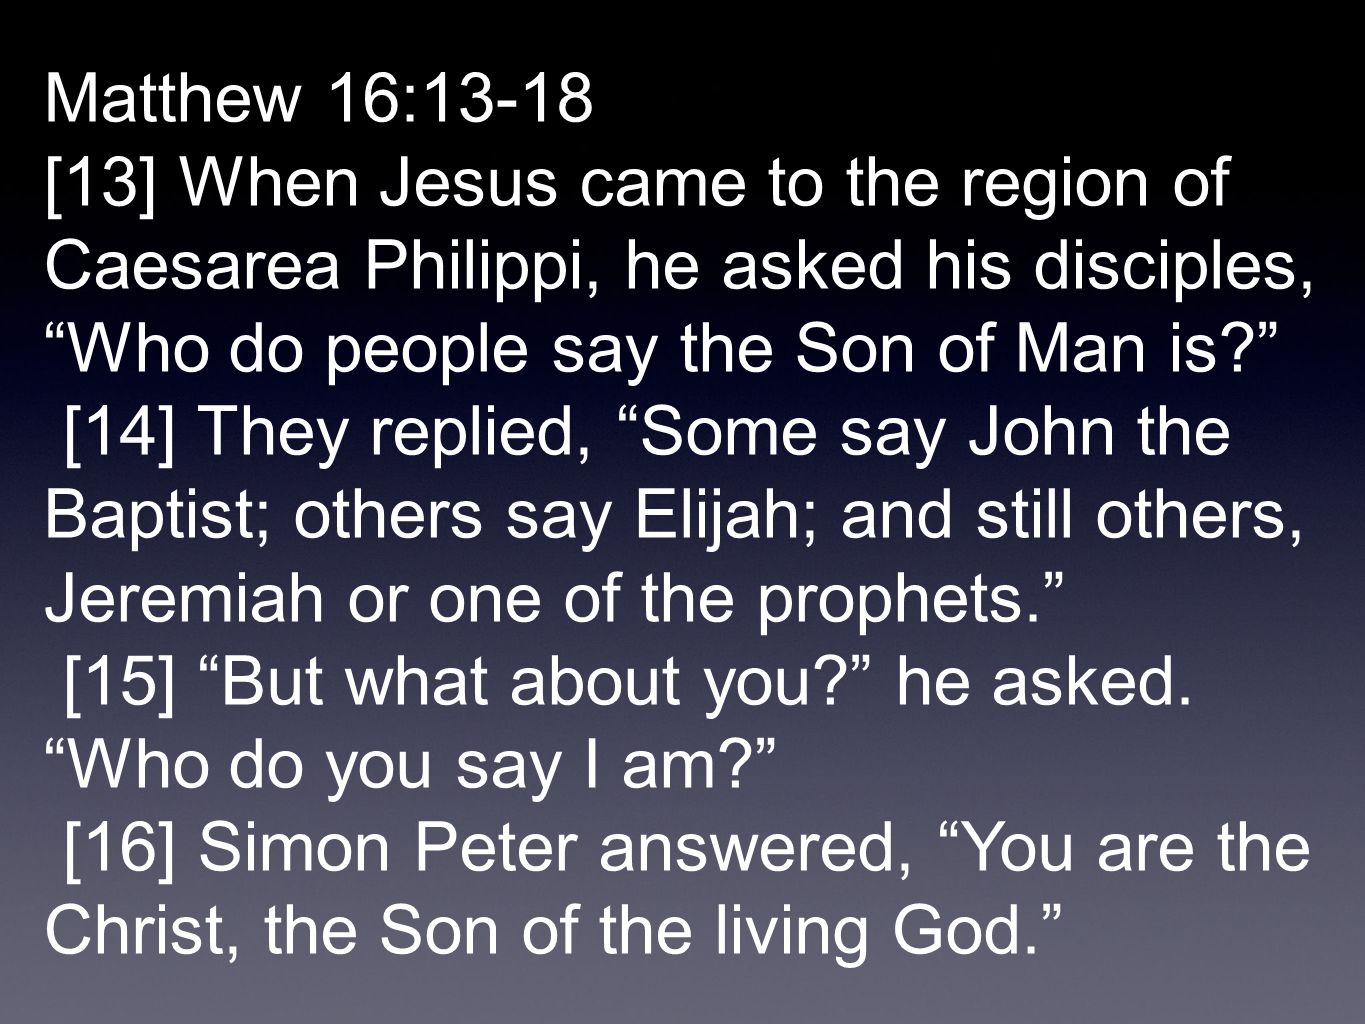 Matthew 16:13-18 [13] When Jesus came to the region of Caesarea Philippi, he asked his disciples, Who do people say the Son of Man is [14] They replied, Some say John the Baptist; others say Elijah; and still others, Jeremiah or one of the prophets. [15] But what about you he asked.